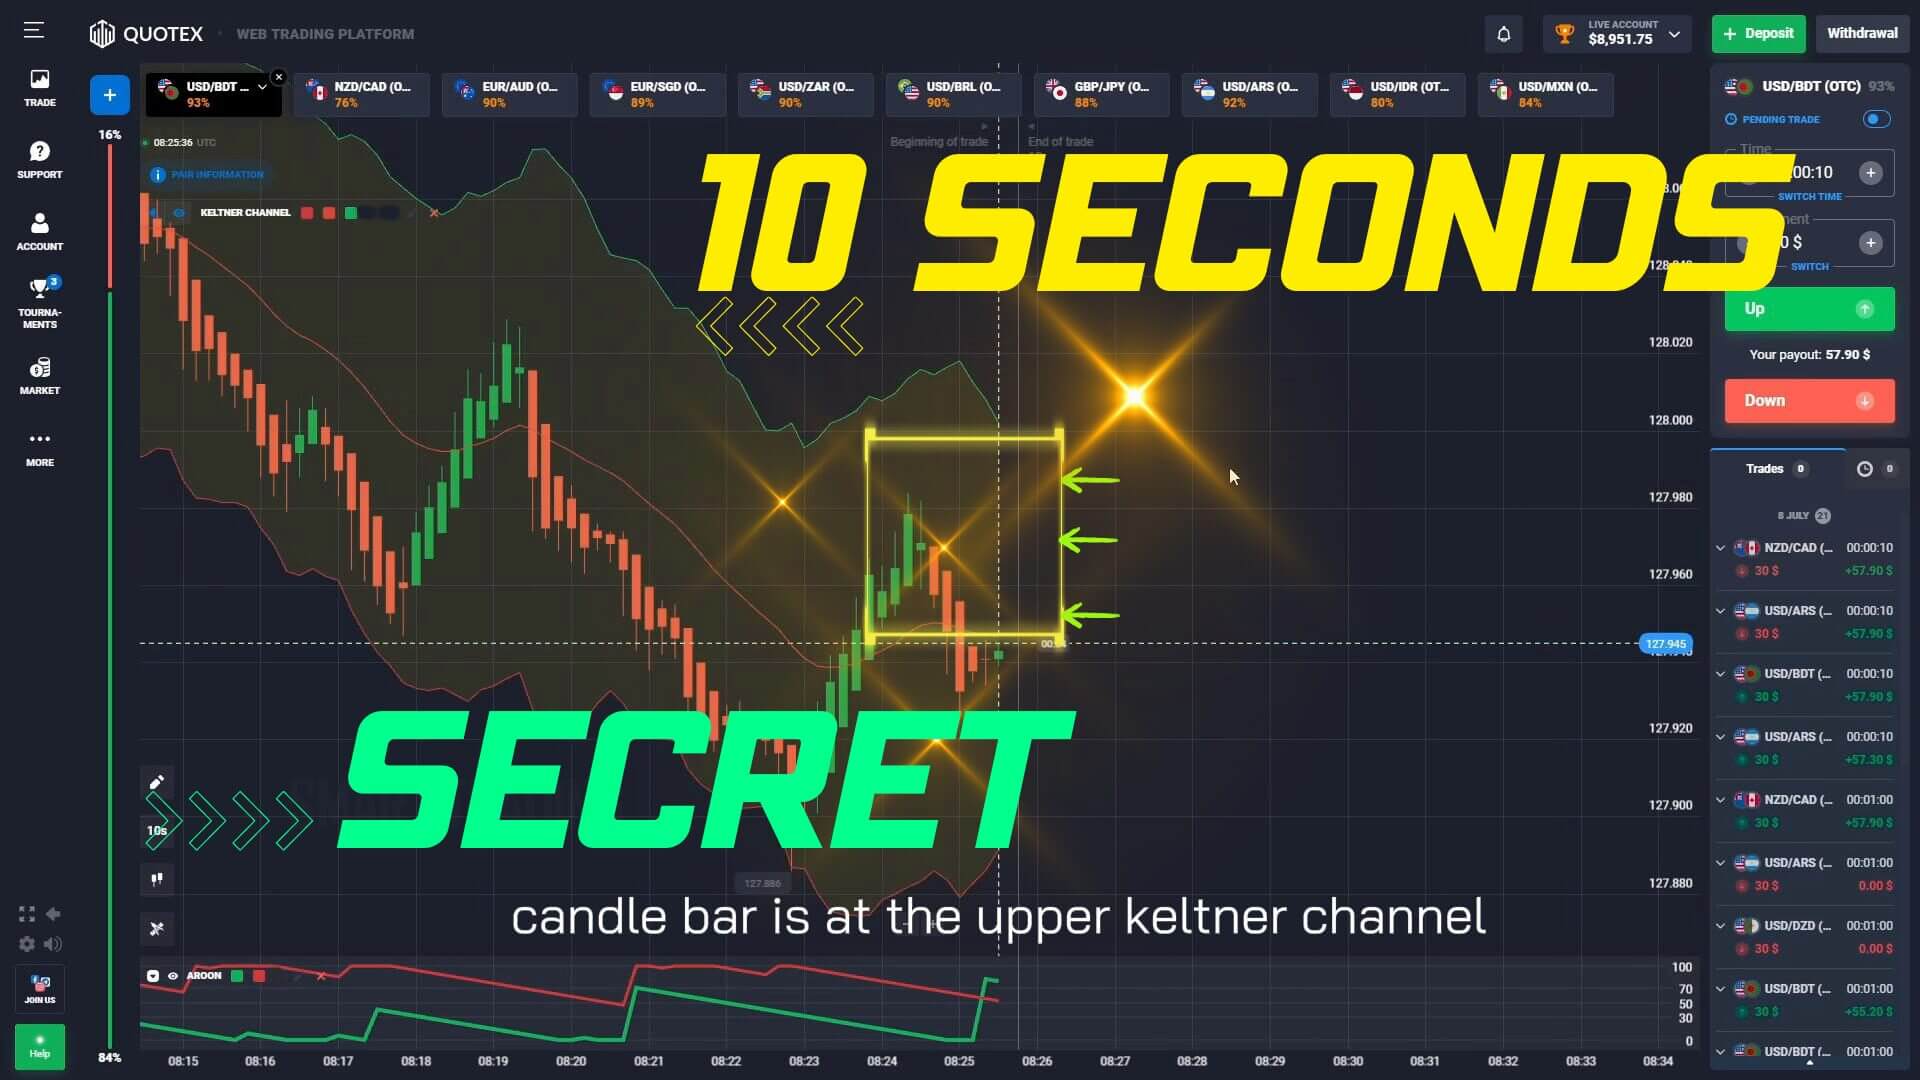 10 Seconds Quotex Trading